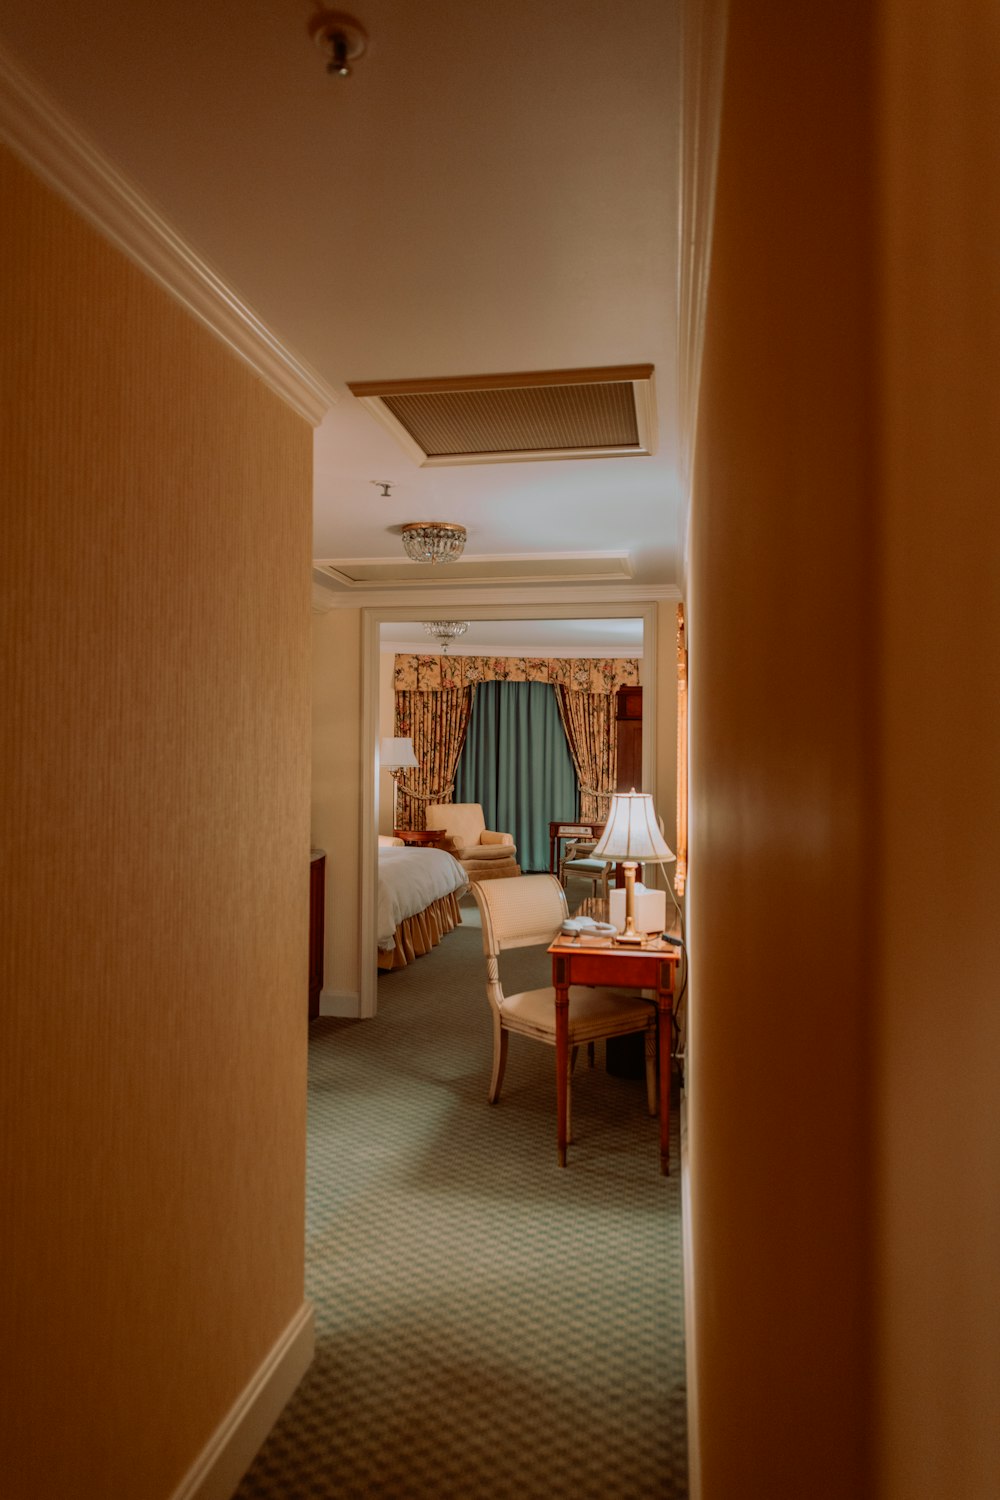 a view of a hotel room through a doorway